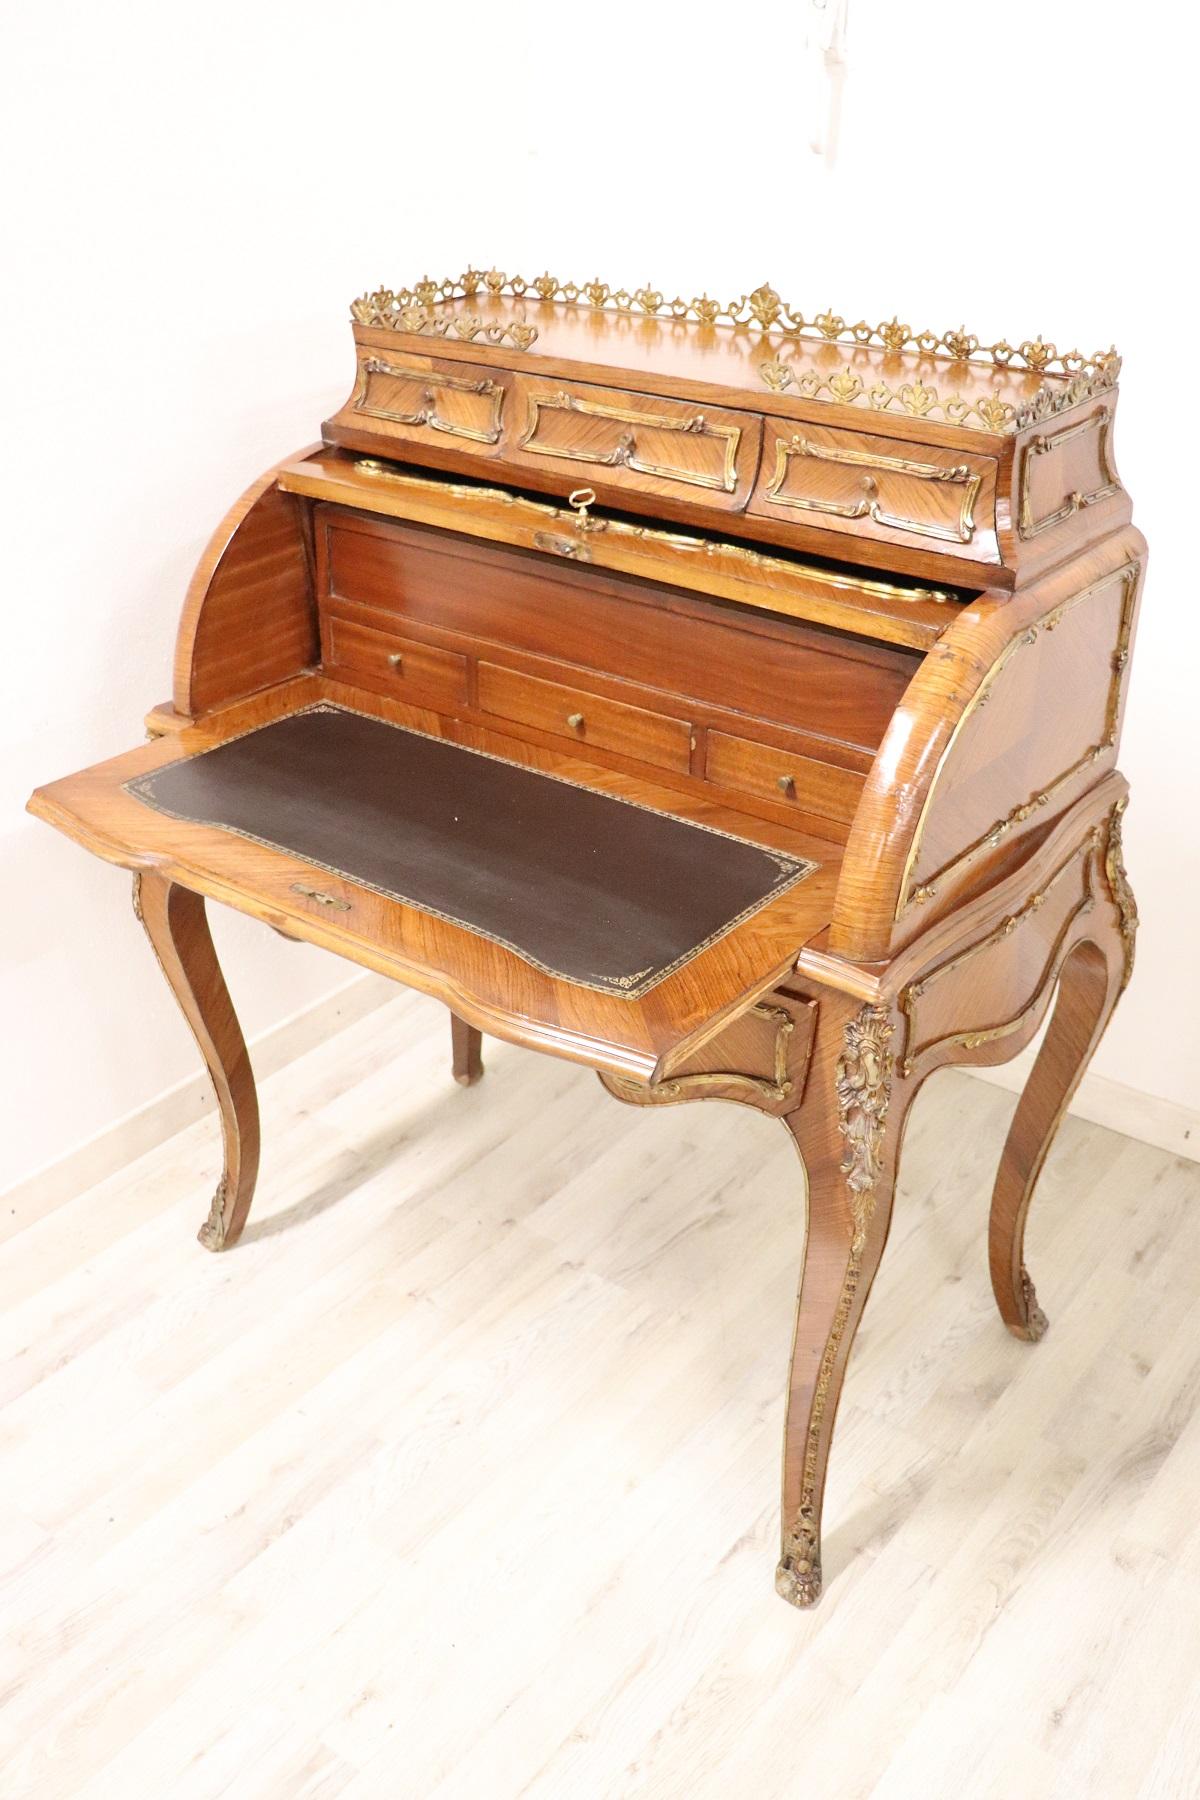 Late 19th Century 19th Century French Louis XV Style Rosewood and Ormolu Bureau or Writing Desk